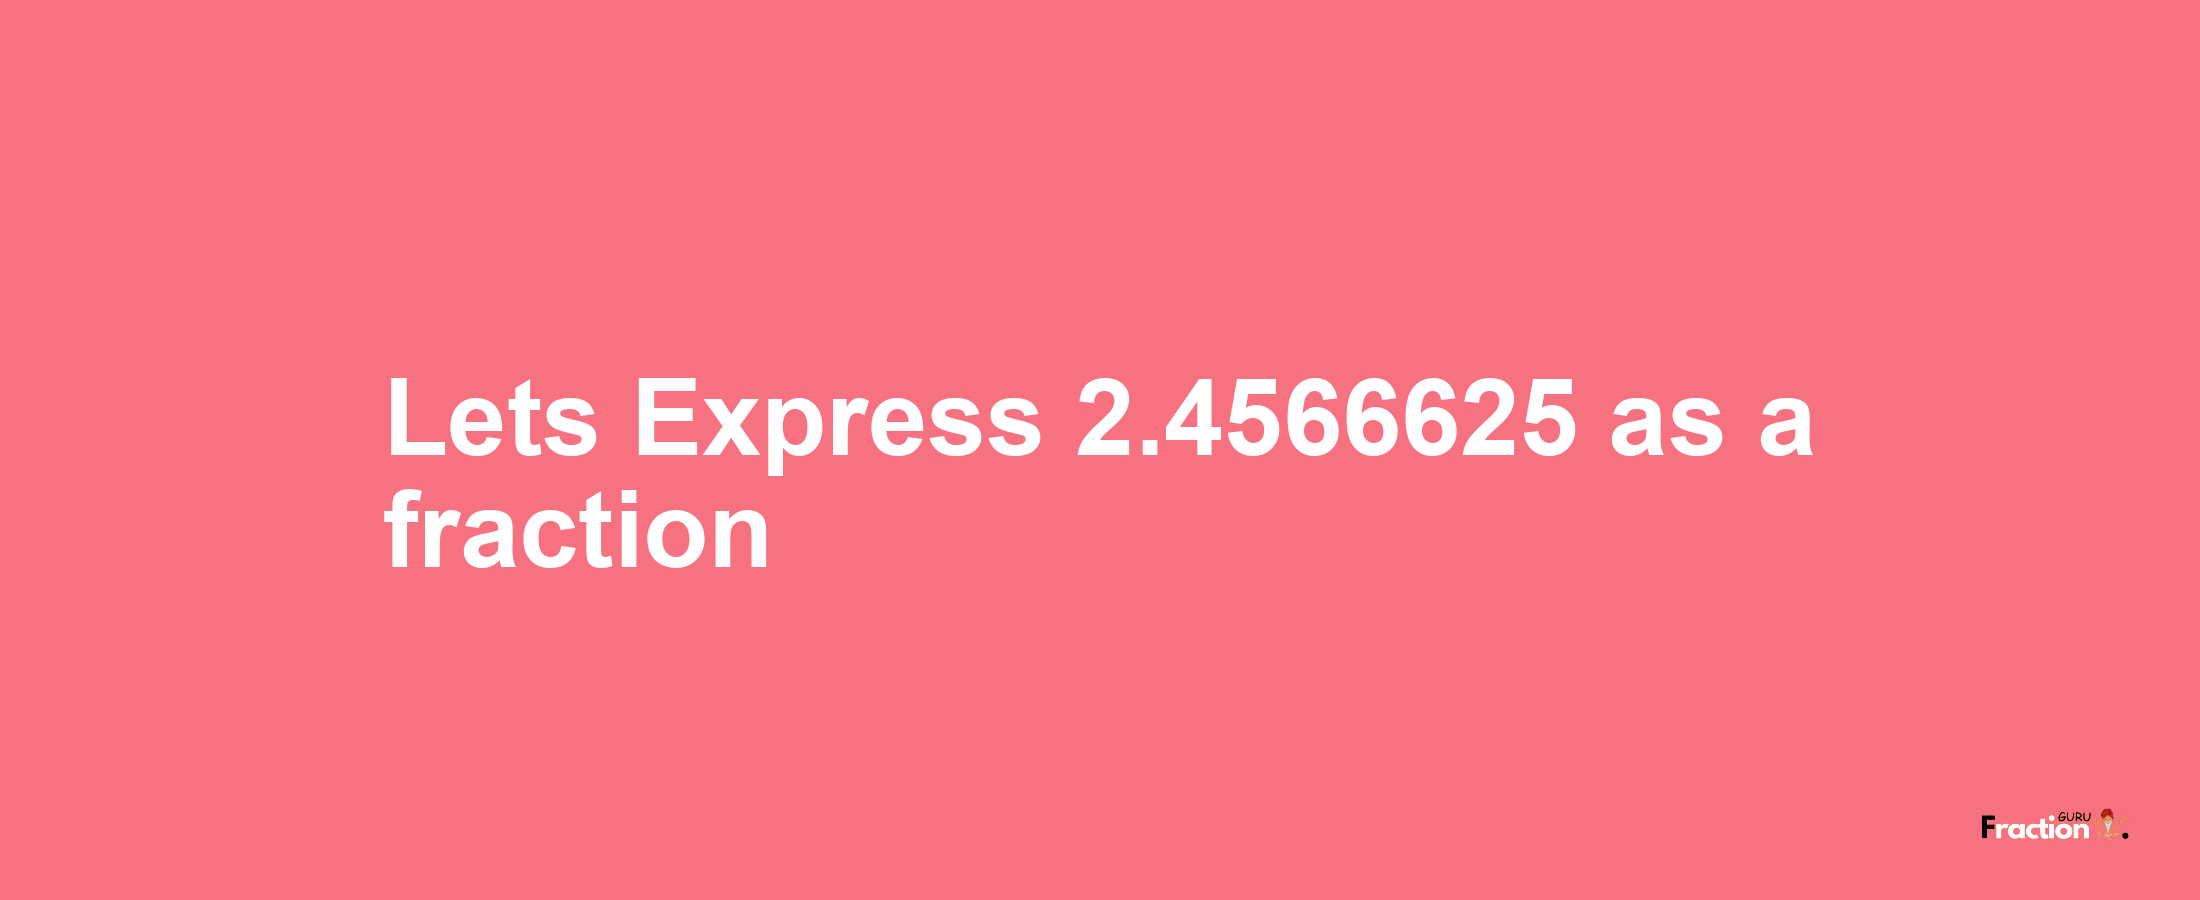 Lets Express 2.4566625 as afraction